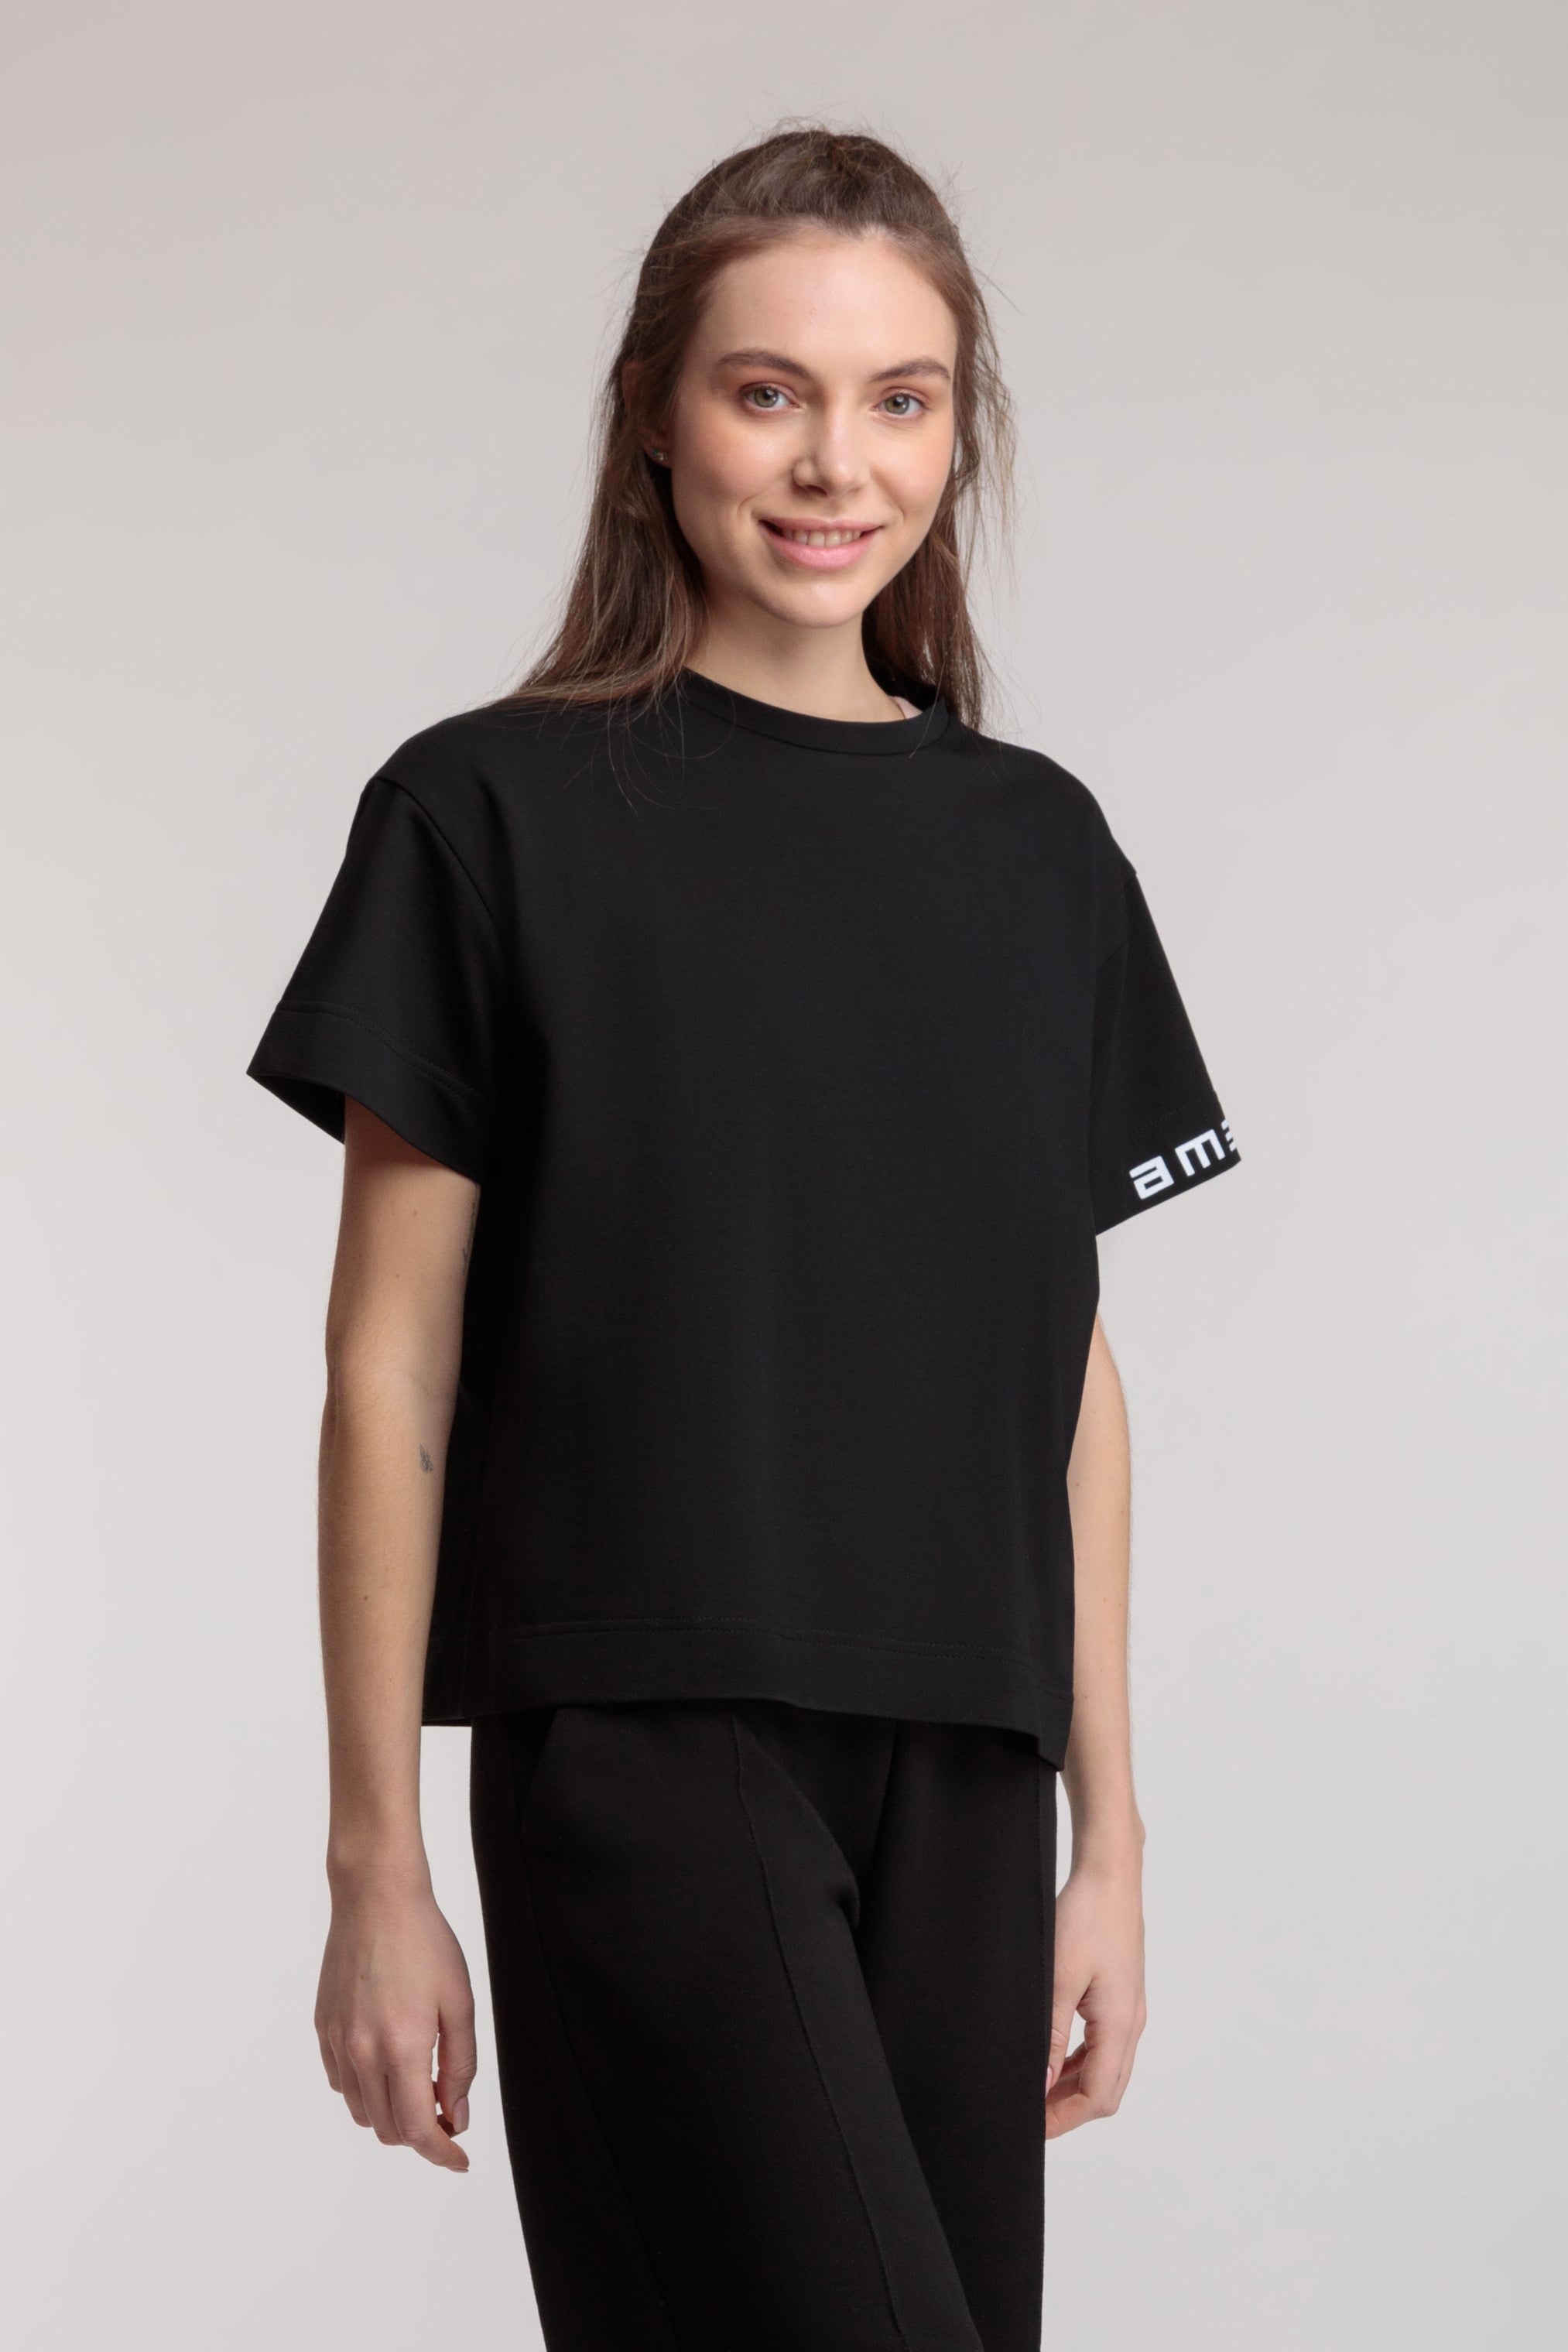 Straight women's T-shirt in black color, logo on the sleeve